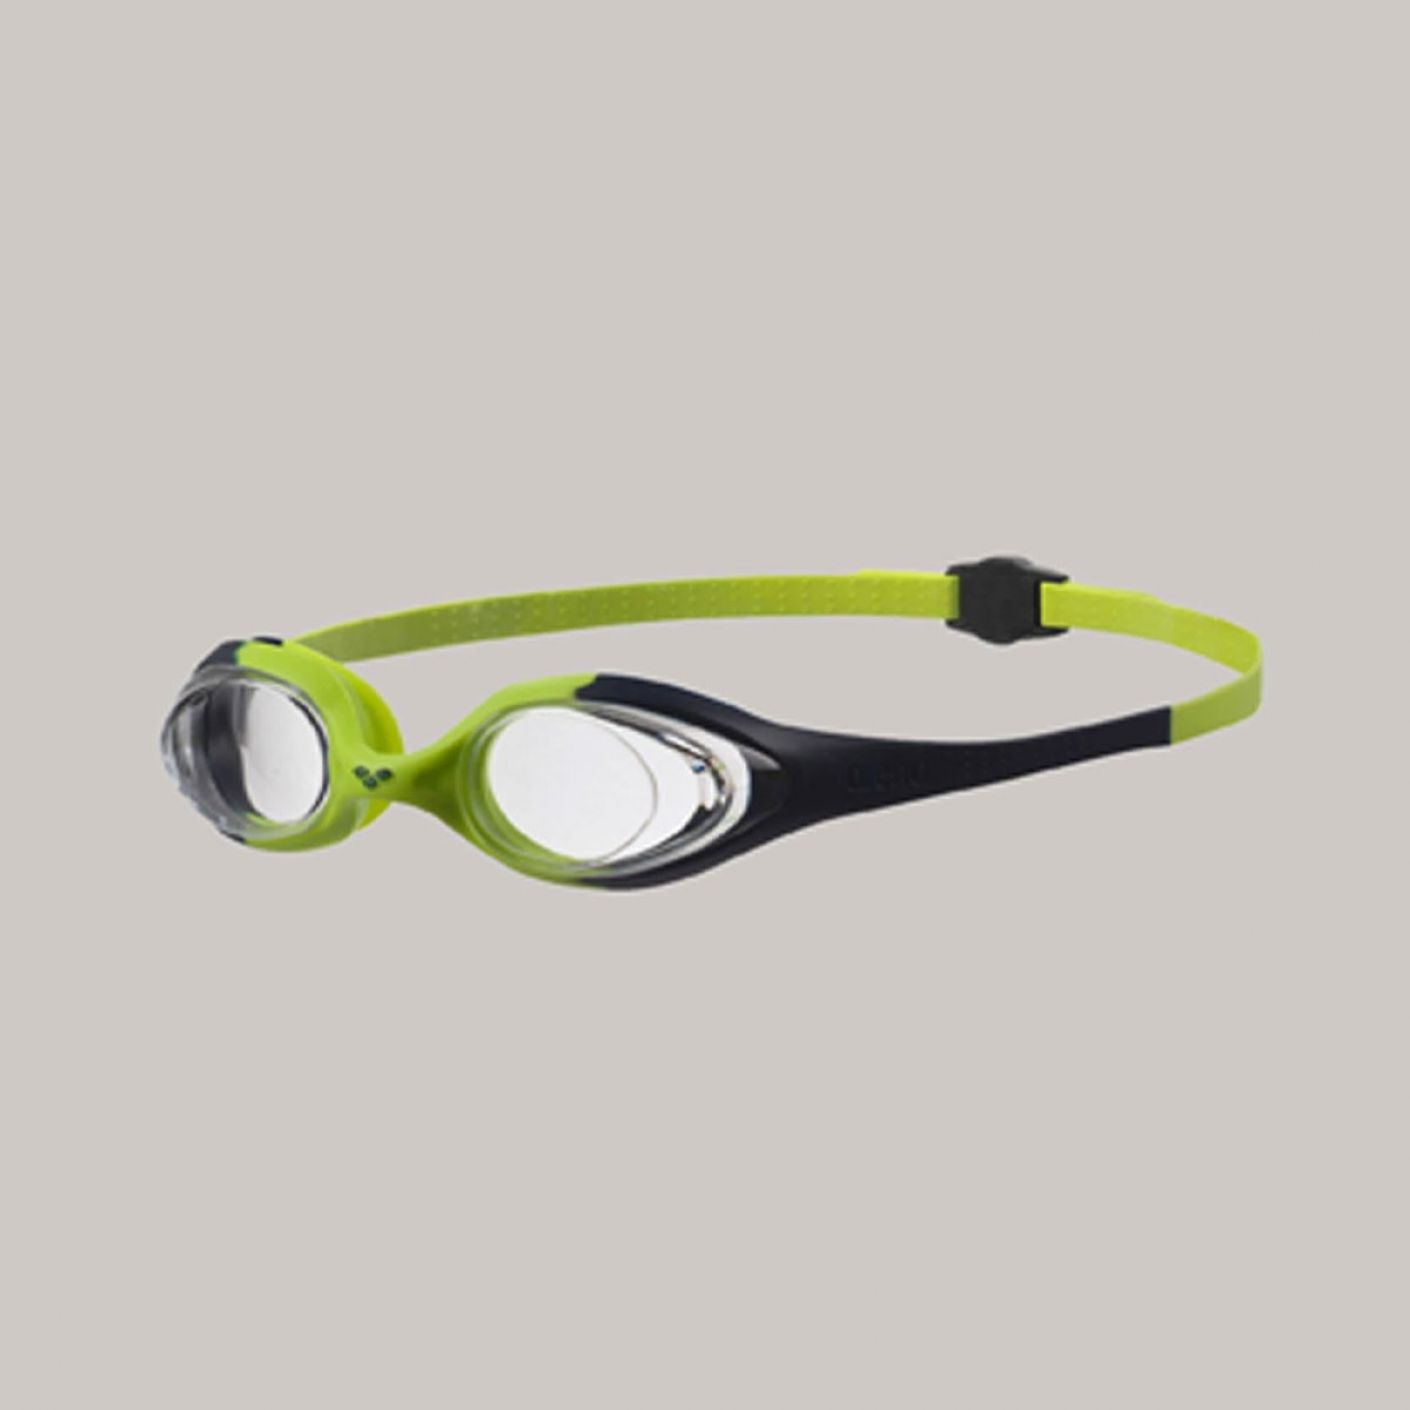 Arena Kid's Spider Goggles Black-Green Clear Lens